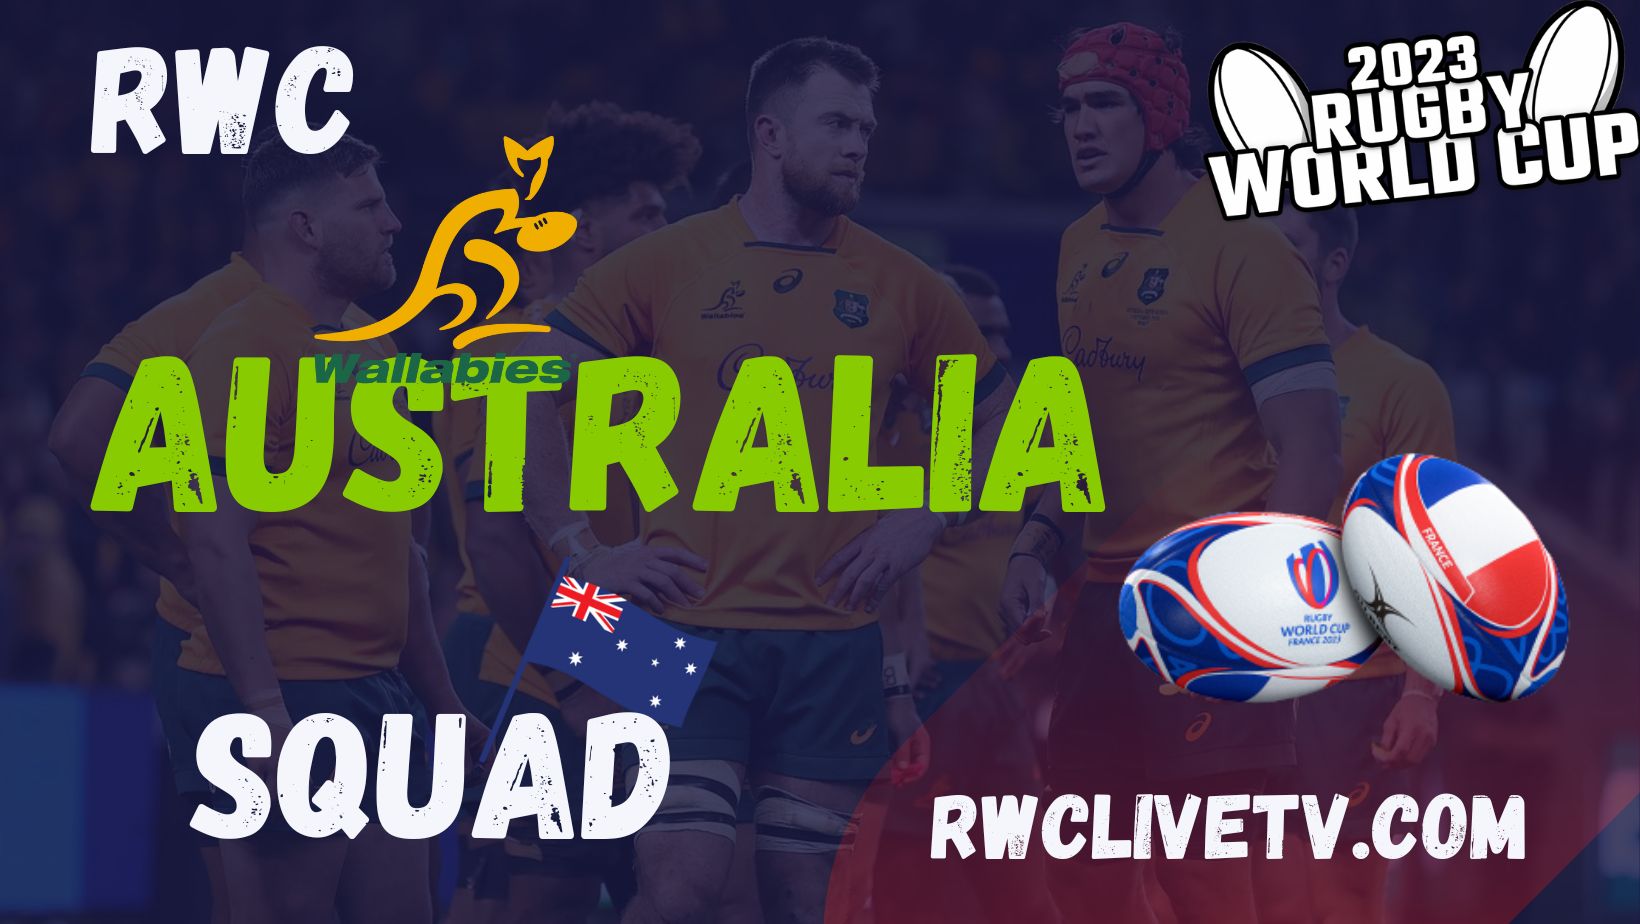 australia-rwc-team-2023-squad-schedule-how-to-watch-players-stats